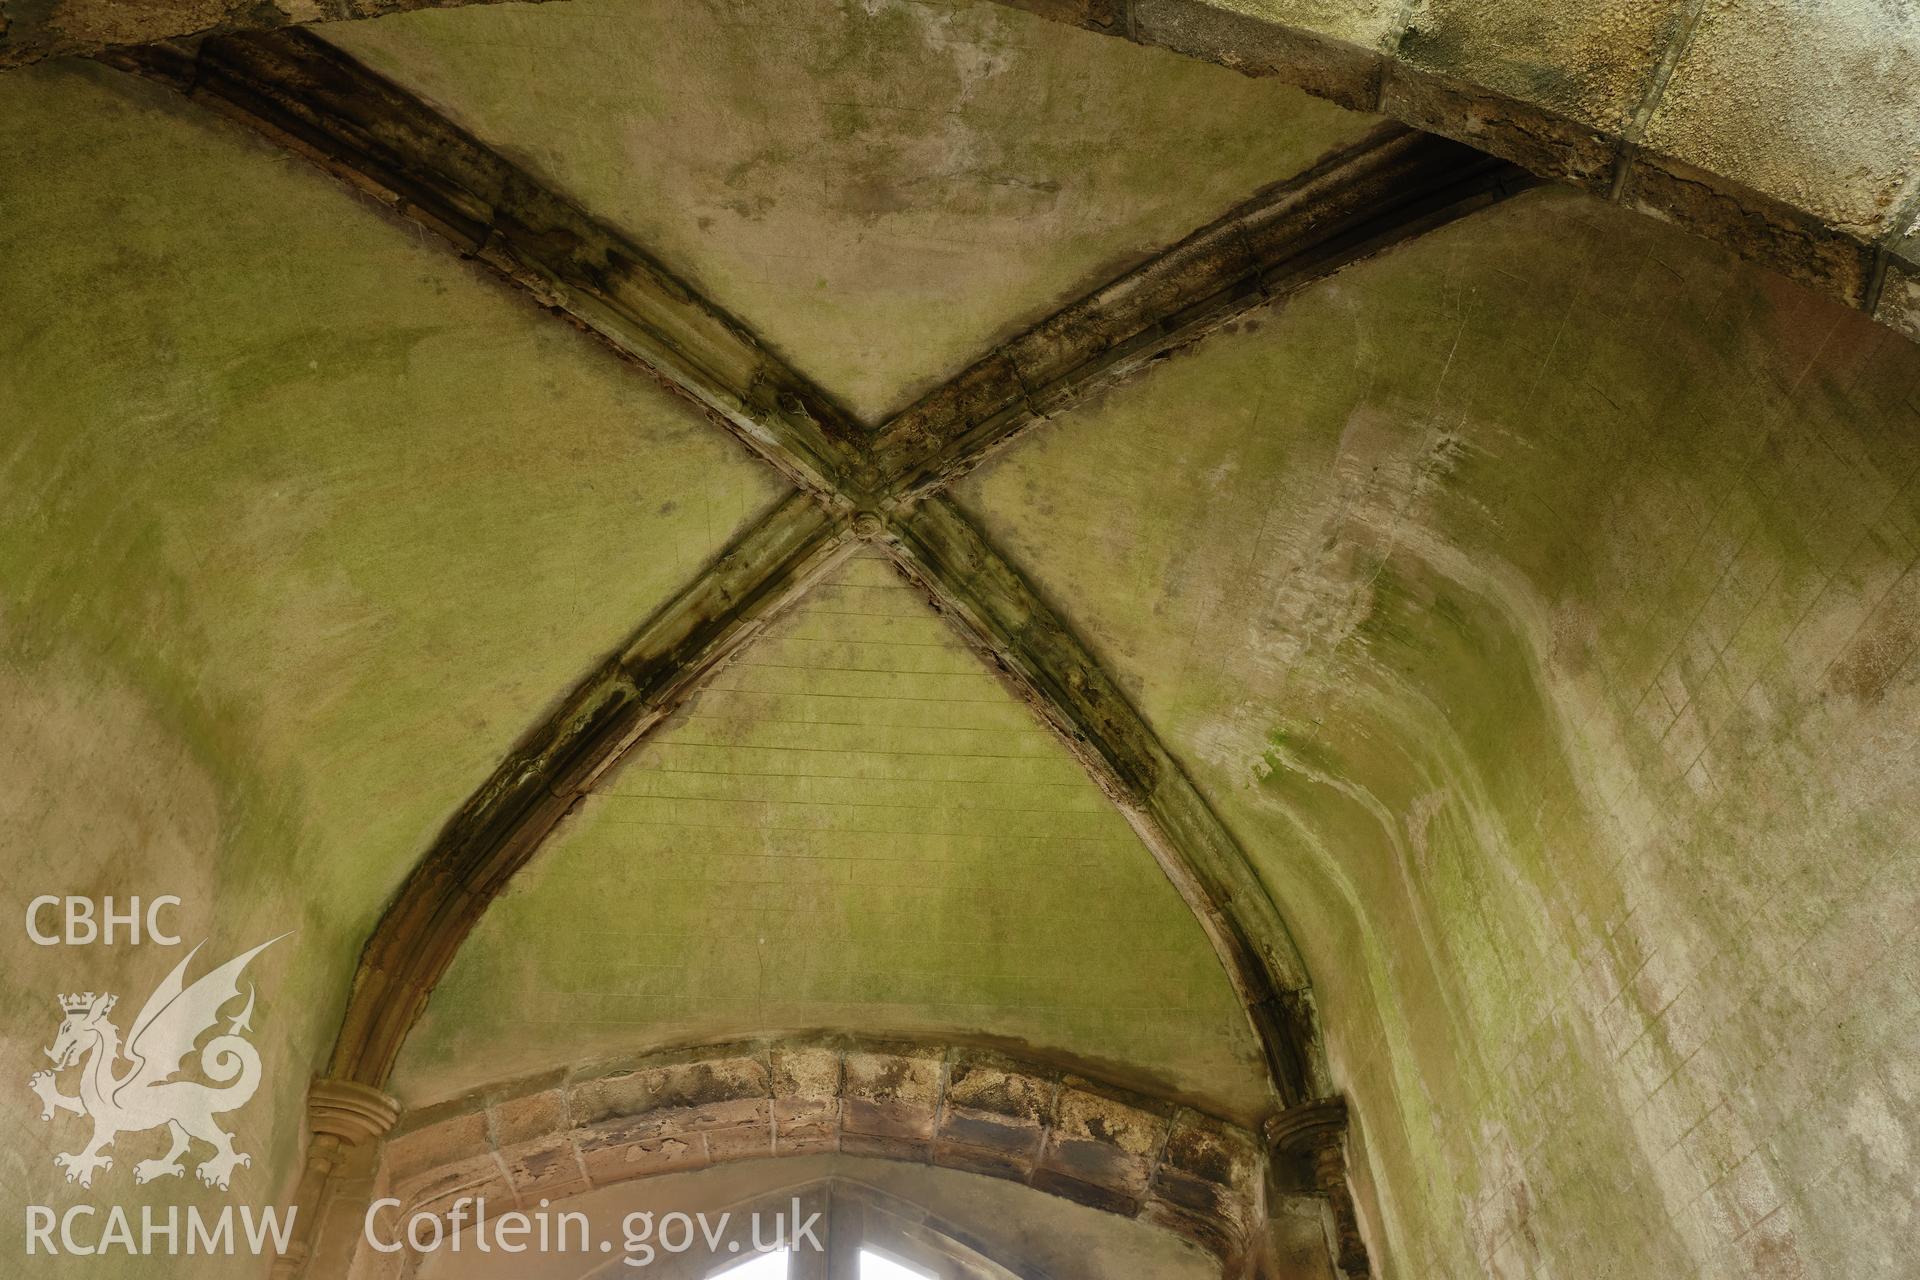 Colour photograph showing Great Porthmel Gatehouse - passage vault, looking SE. Produced as part of Historic Building Recording for Great Porthamel Gatehouse, carried out by Richard Hayman, April 2021.